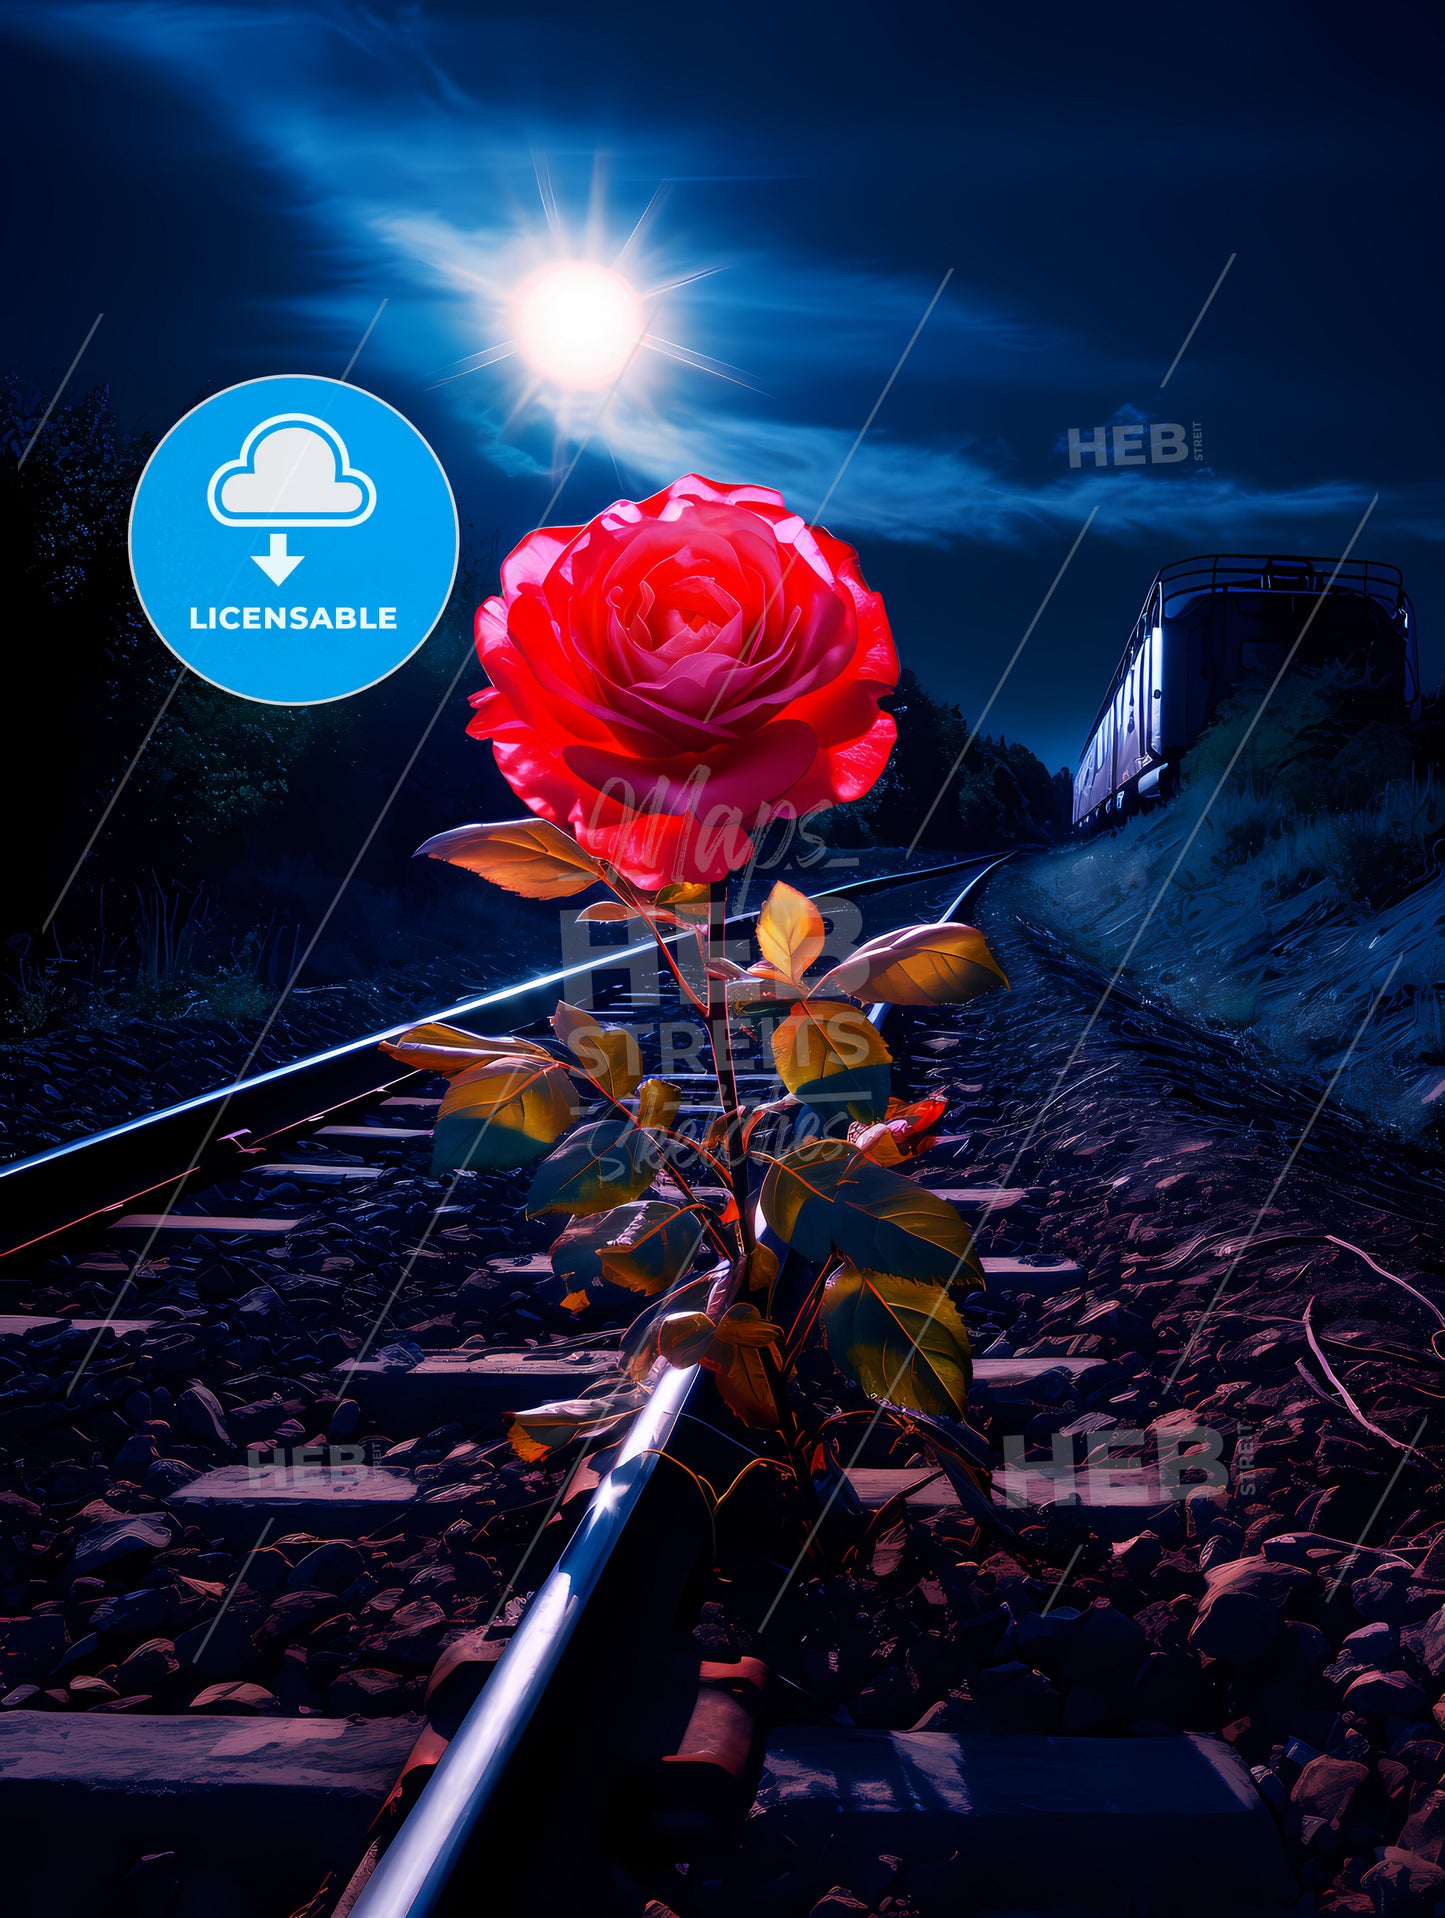 In A Quiet Valley, A Rose Growing On Train Tracks